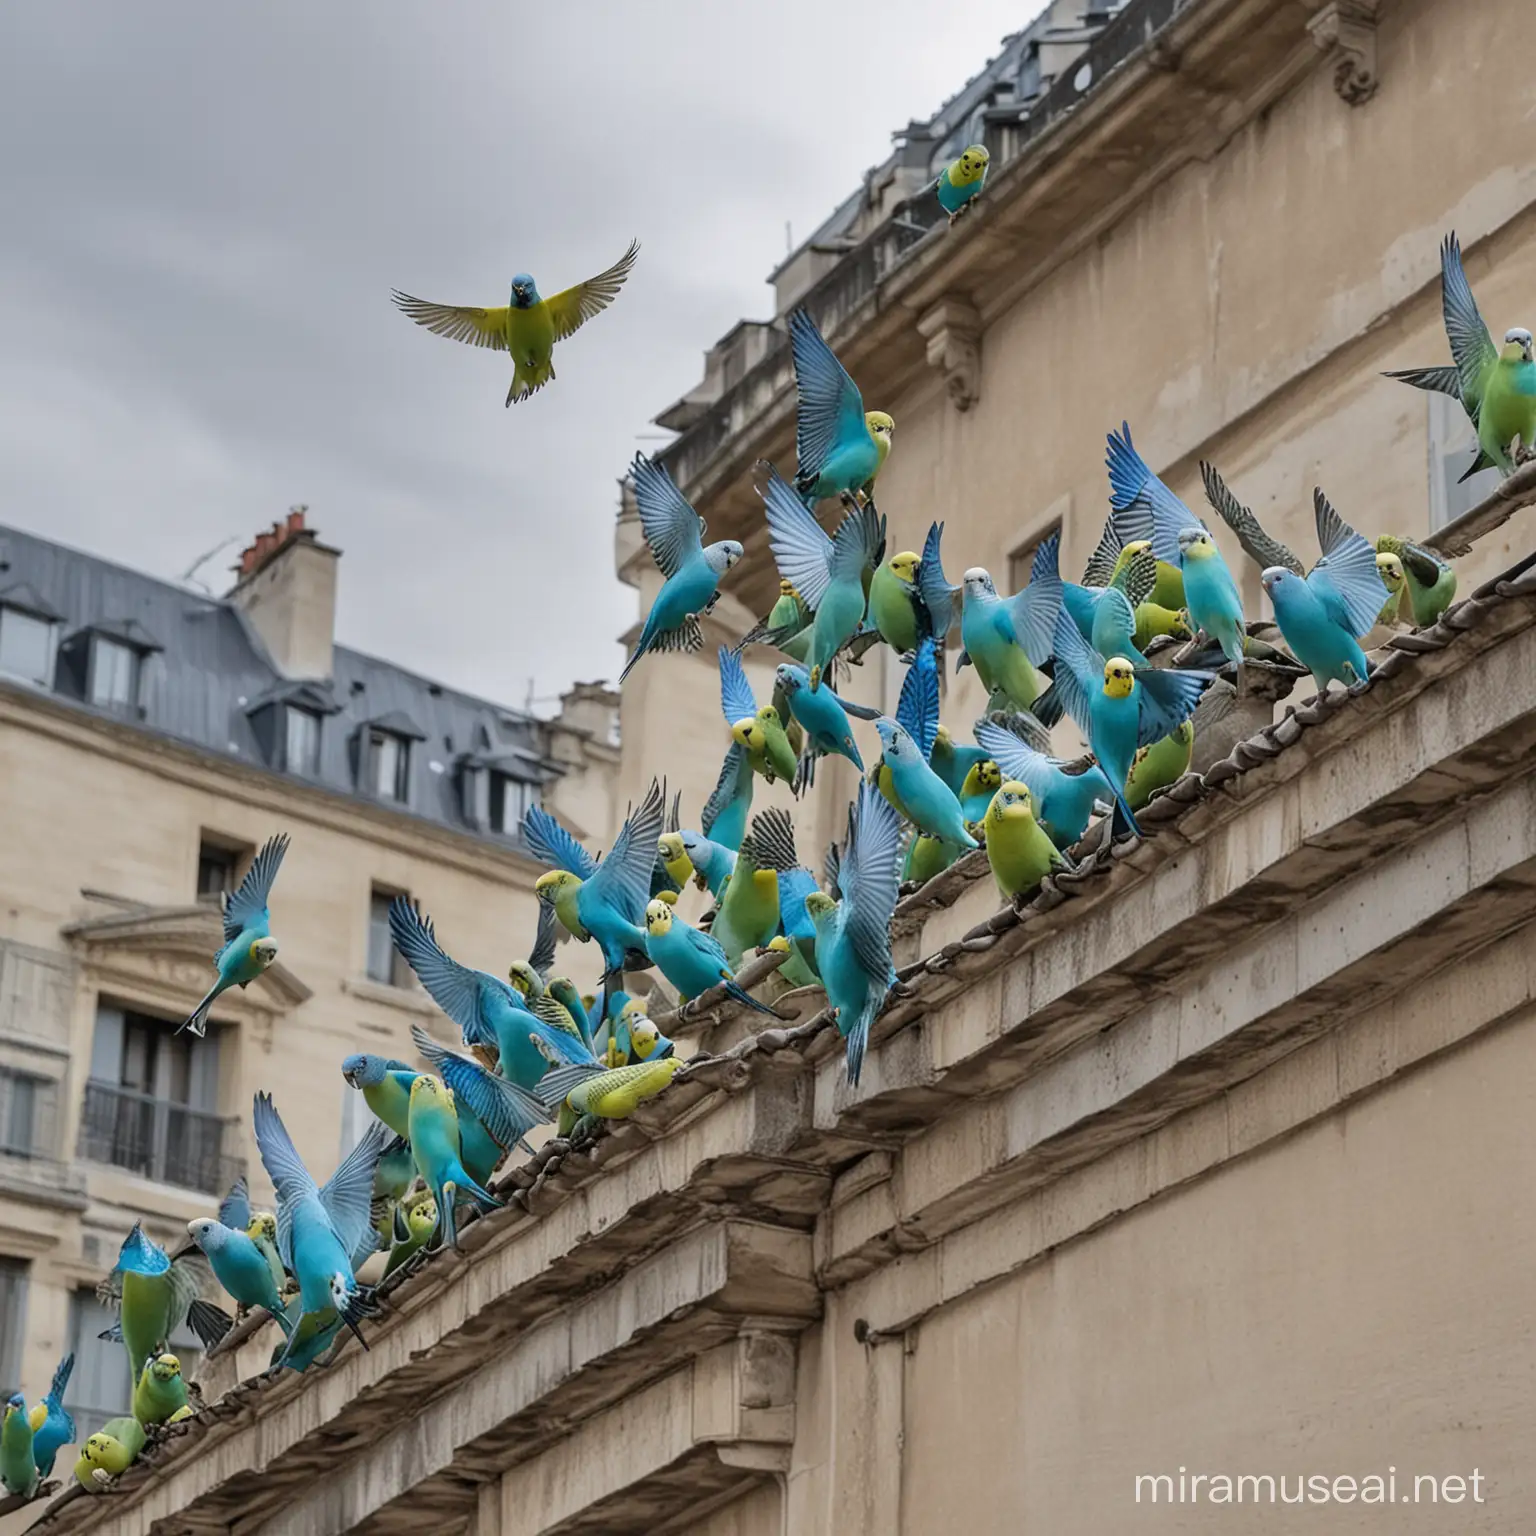 Flock of Colorful Budgerigars Soaring over Parisian Rooftops